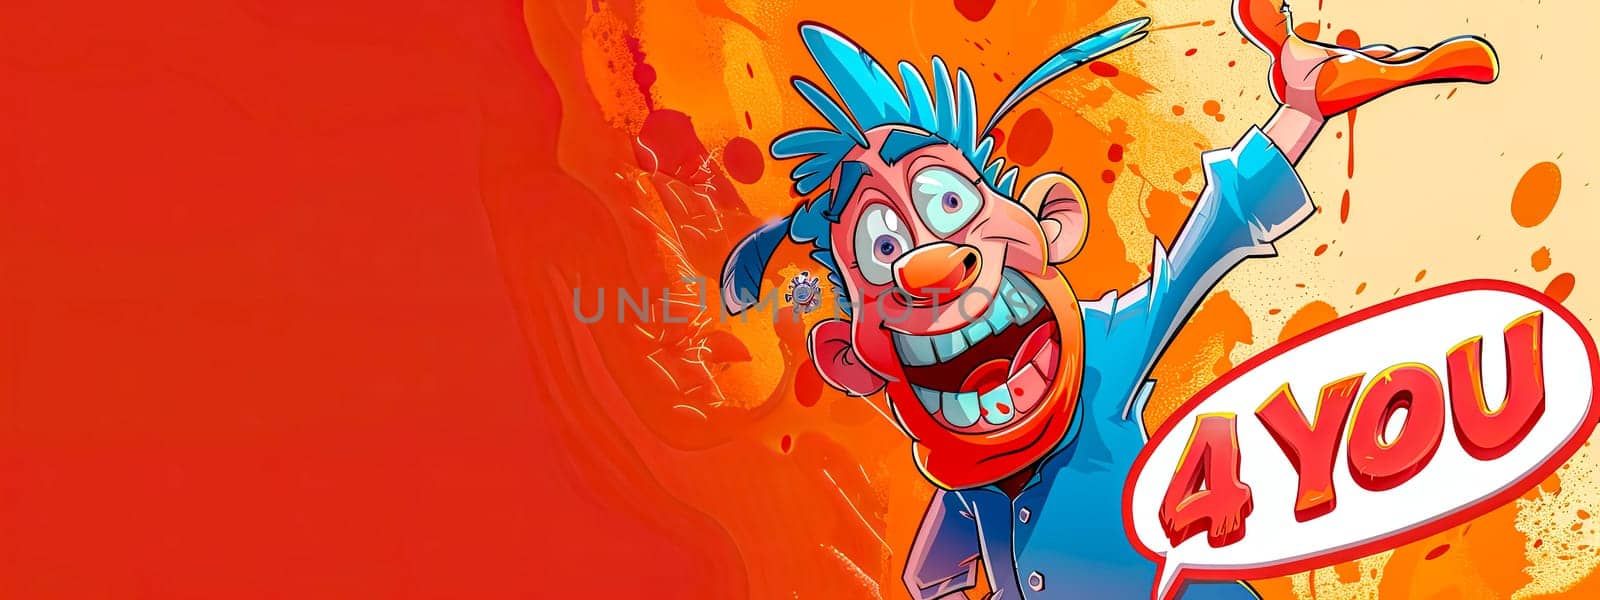 A colorful, animated clown with a playful 4 you sign on a vibrant orange background